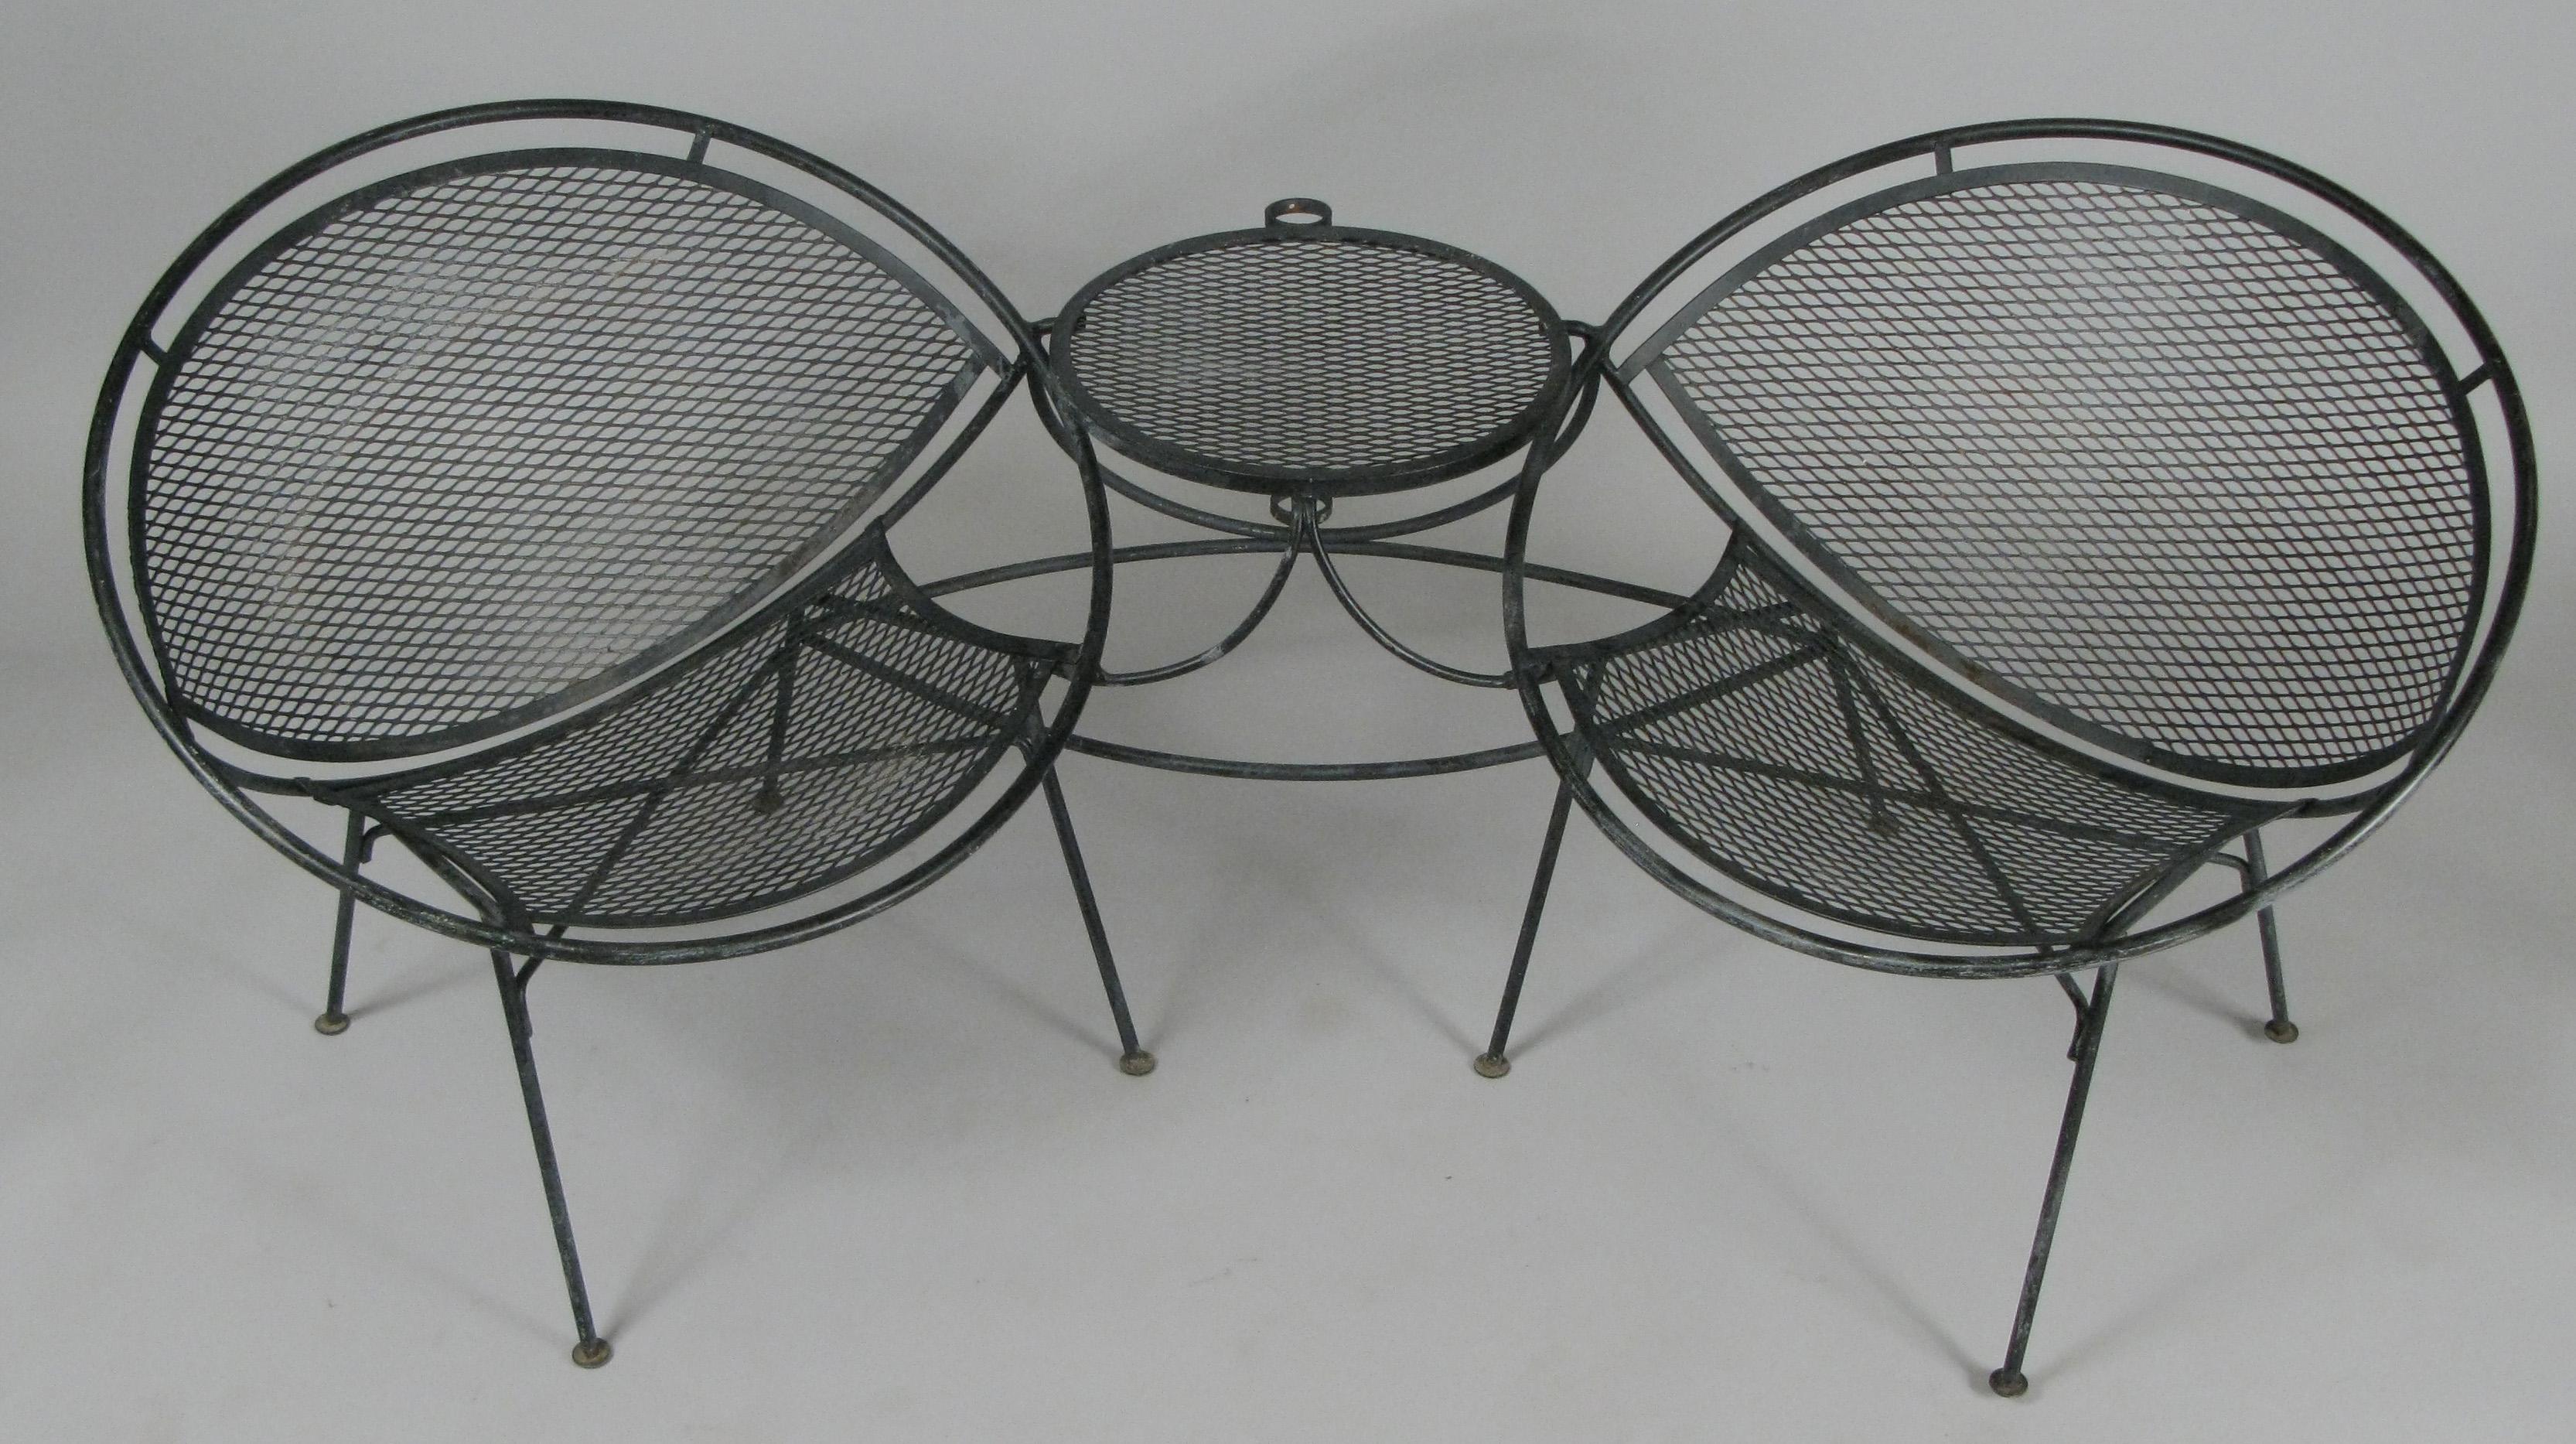 A fantastic wrought iron 'tête-à-tête' settee lounge from Salterini's Radar collection, designed by Maurizio Tempestini, circa 1950. Very comfortable and stylish, the two lounge chairs are connected by a table between, which also incorporates an